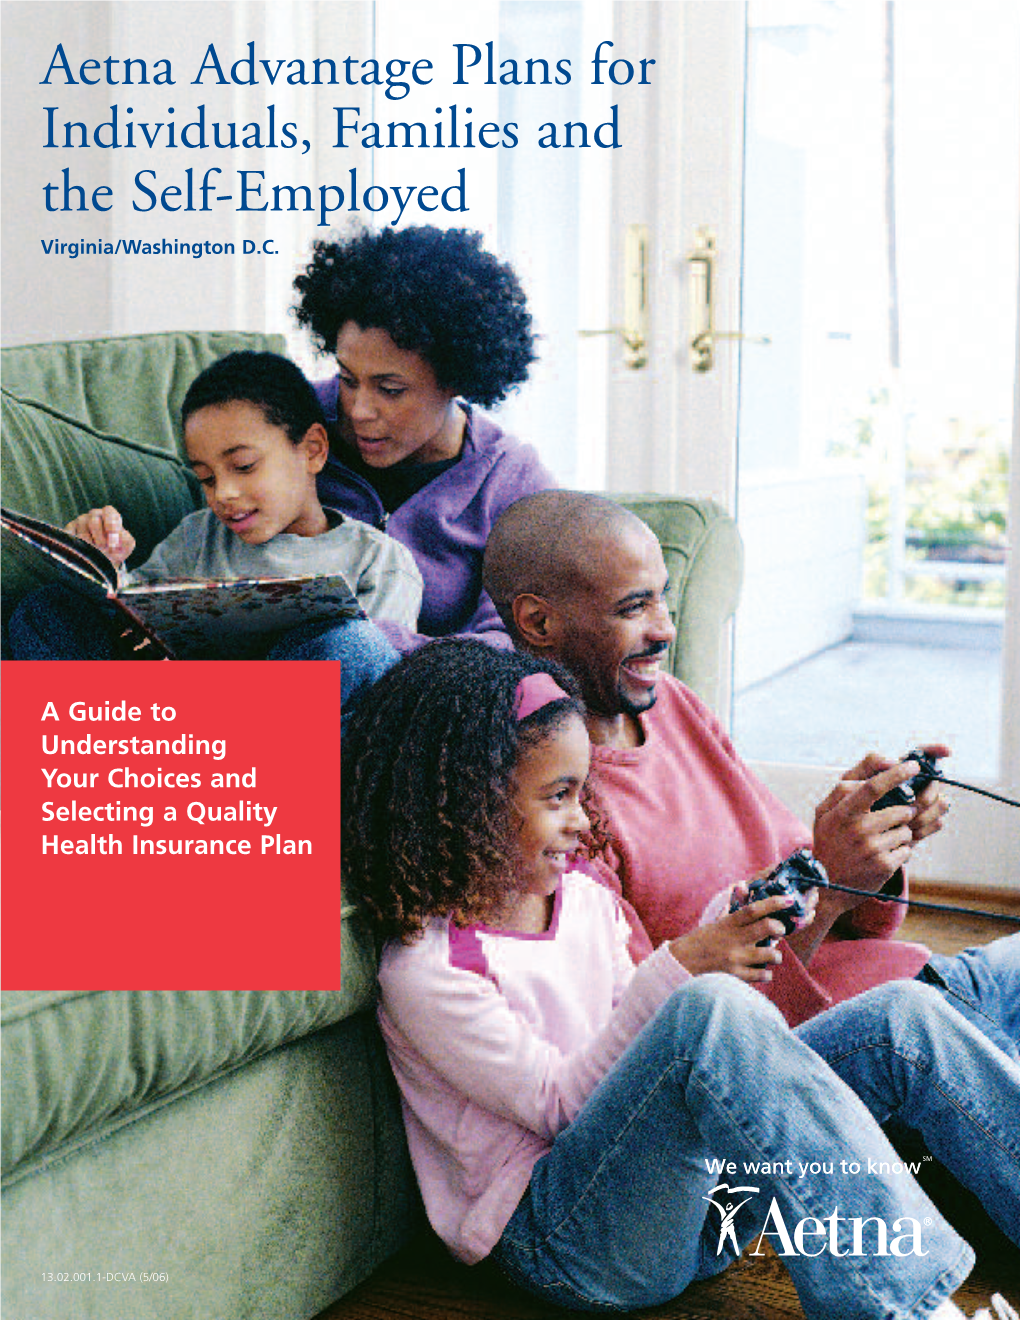 Aetna Advantage Plans for Individuals, Families and the Self-Emplyed